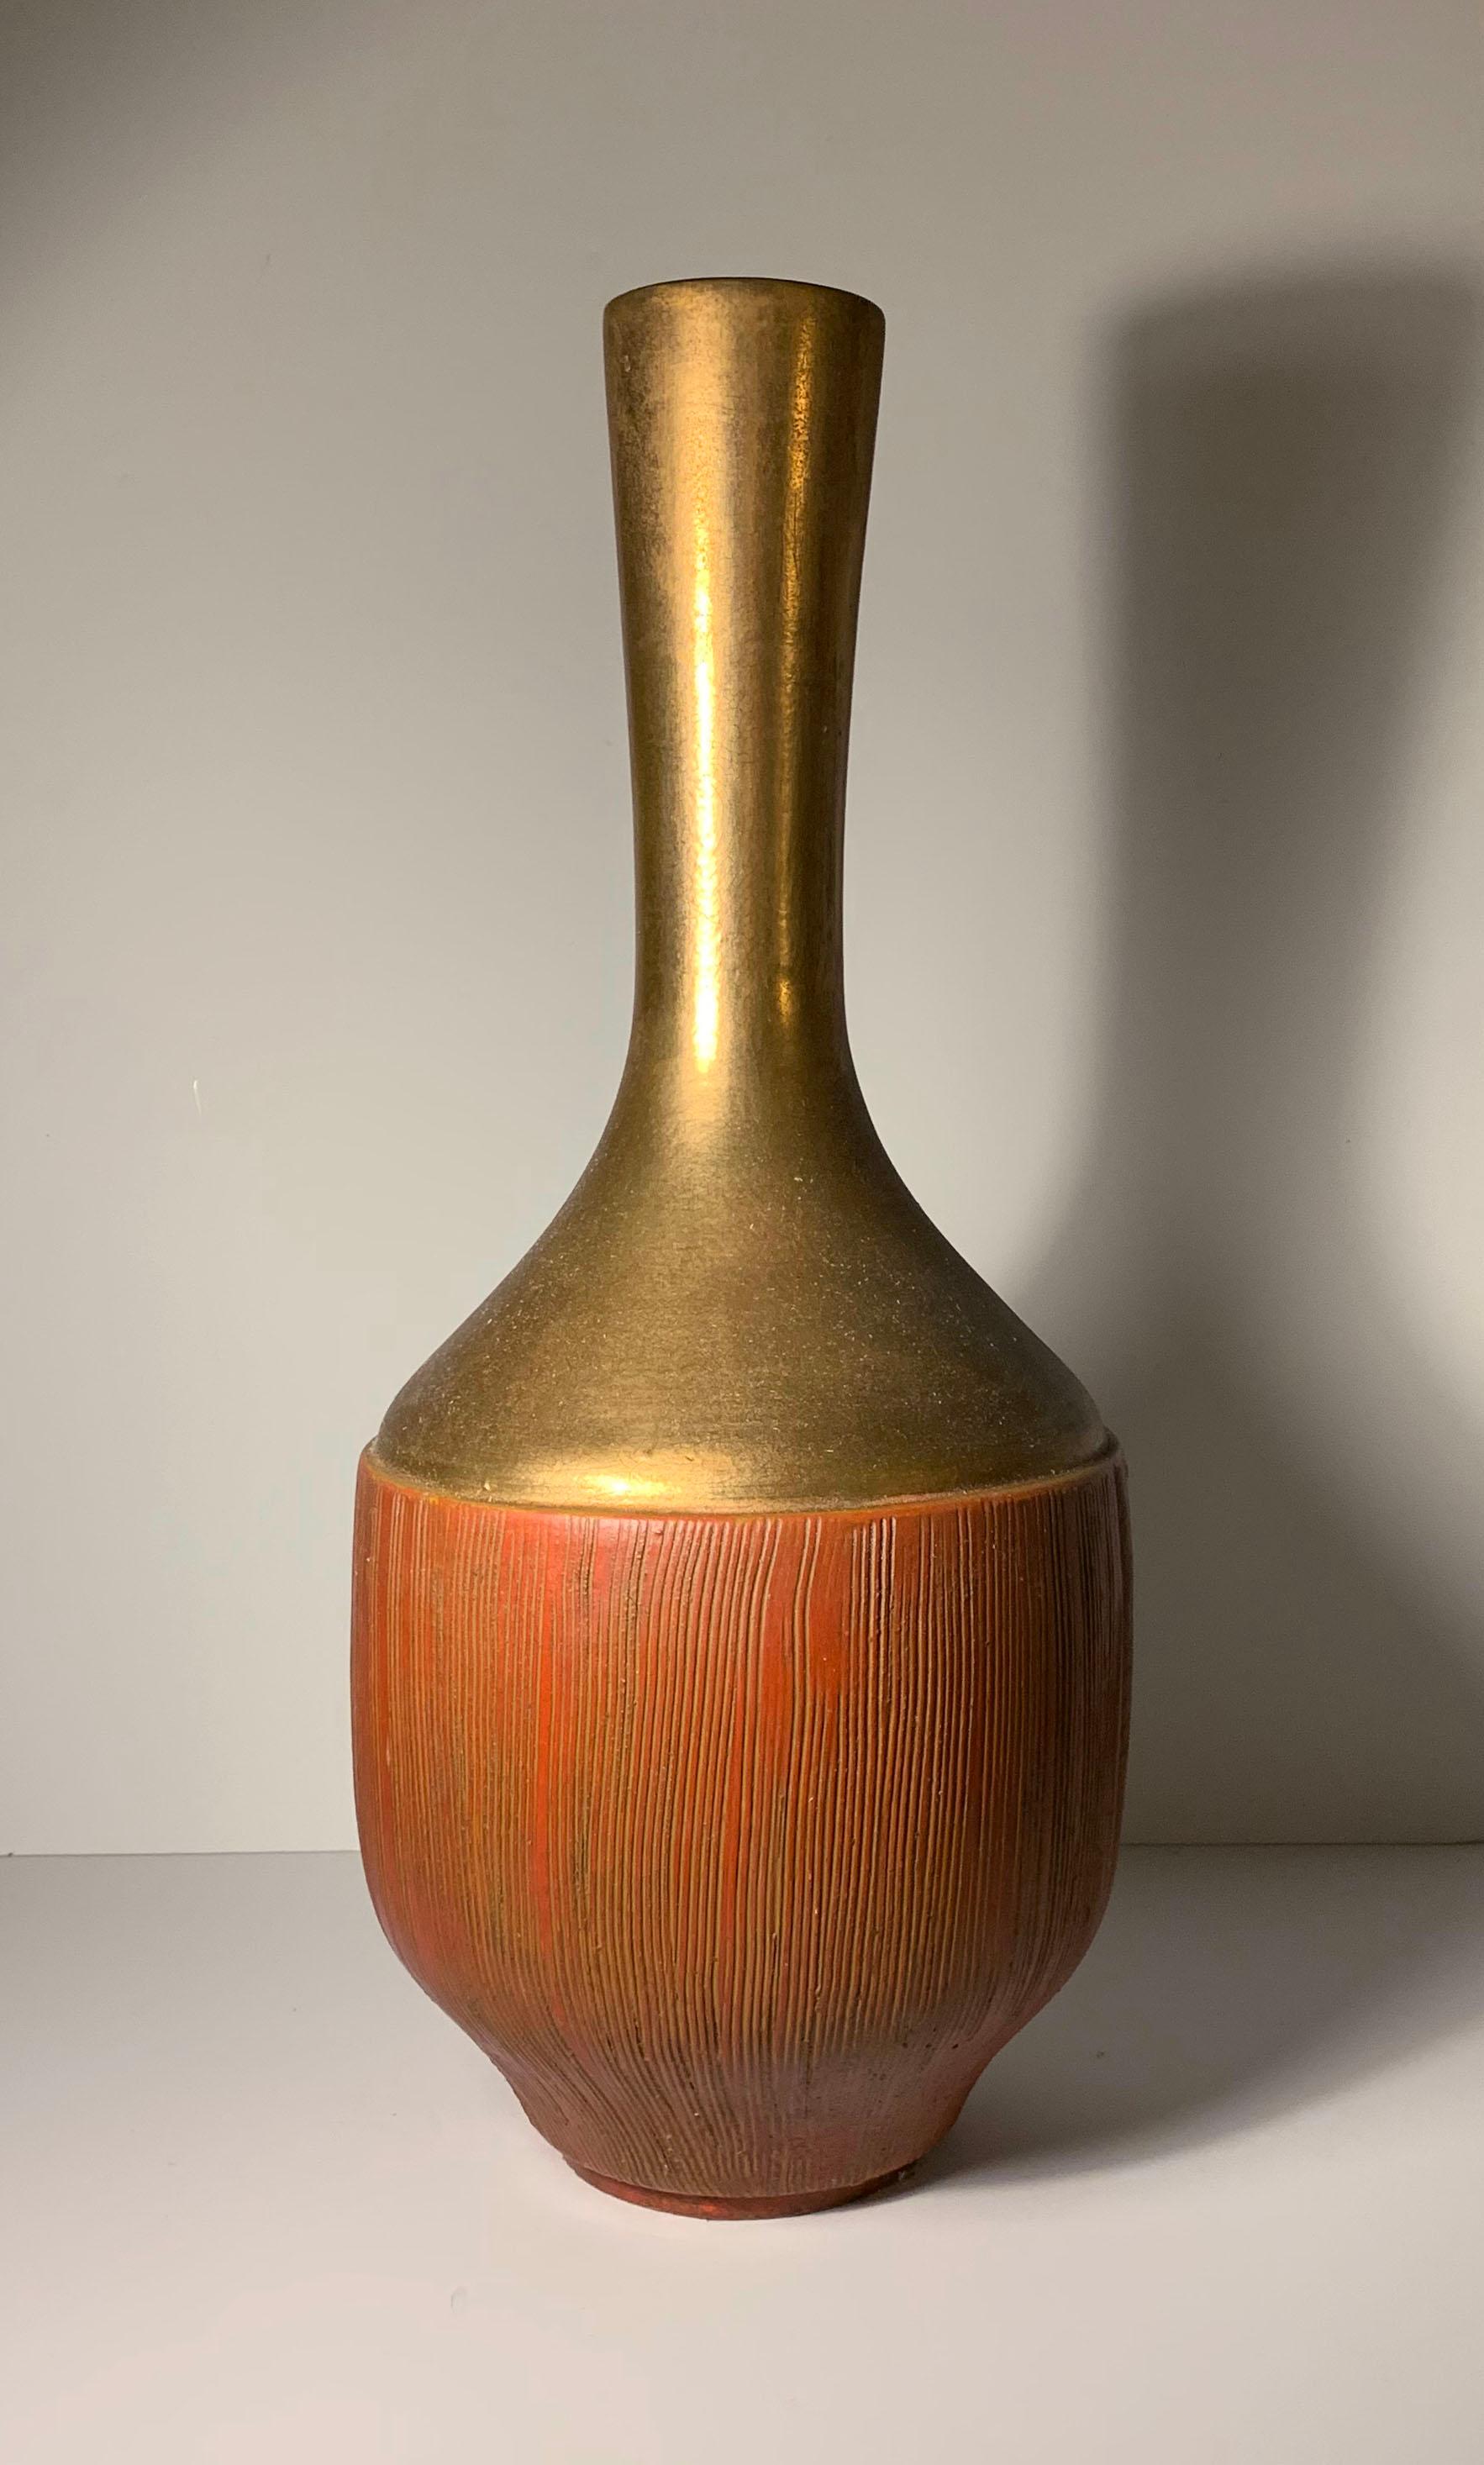 Monumental ceramic lamp by Urbano Zaccagnini. Dating to the 1940s-1950s.

Exported to Marbro Lighting Company of Los Angeles.

Interesting side note: This lamp form (Not the actual one that I know), was used on the Hollywood set of 